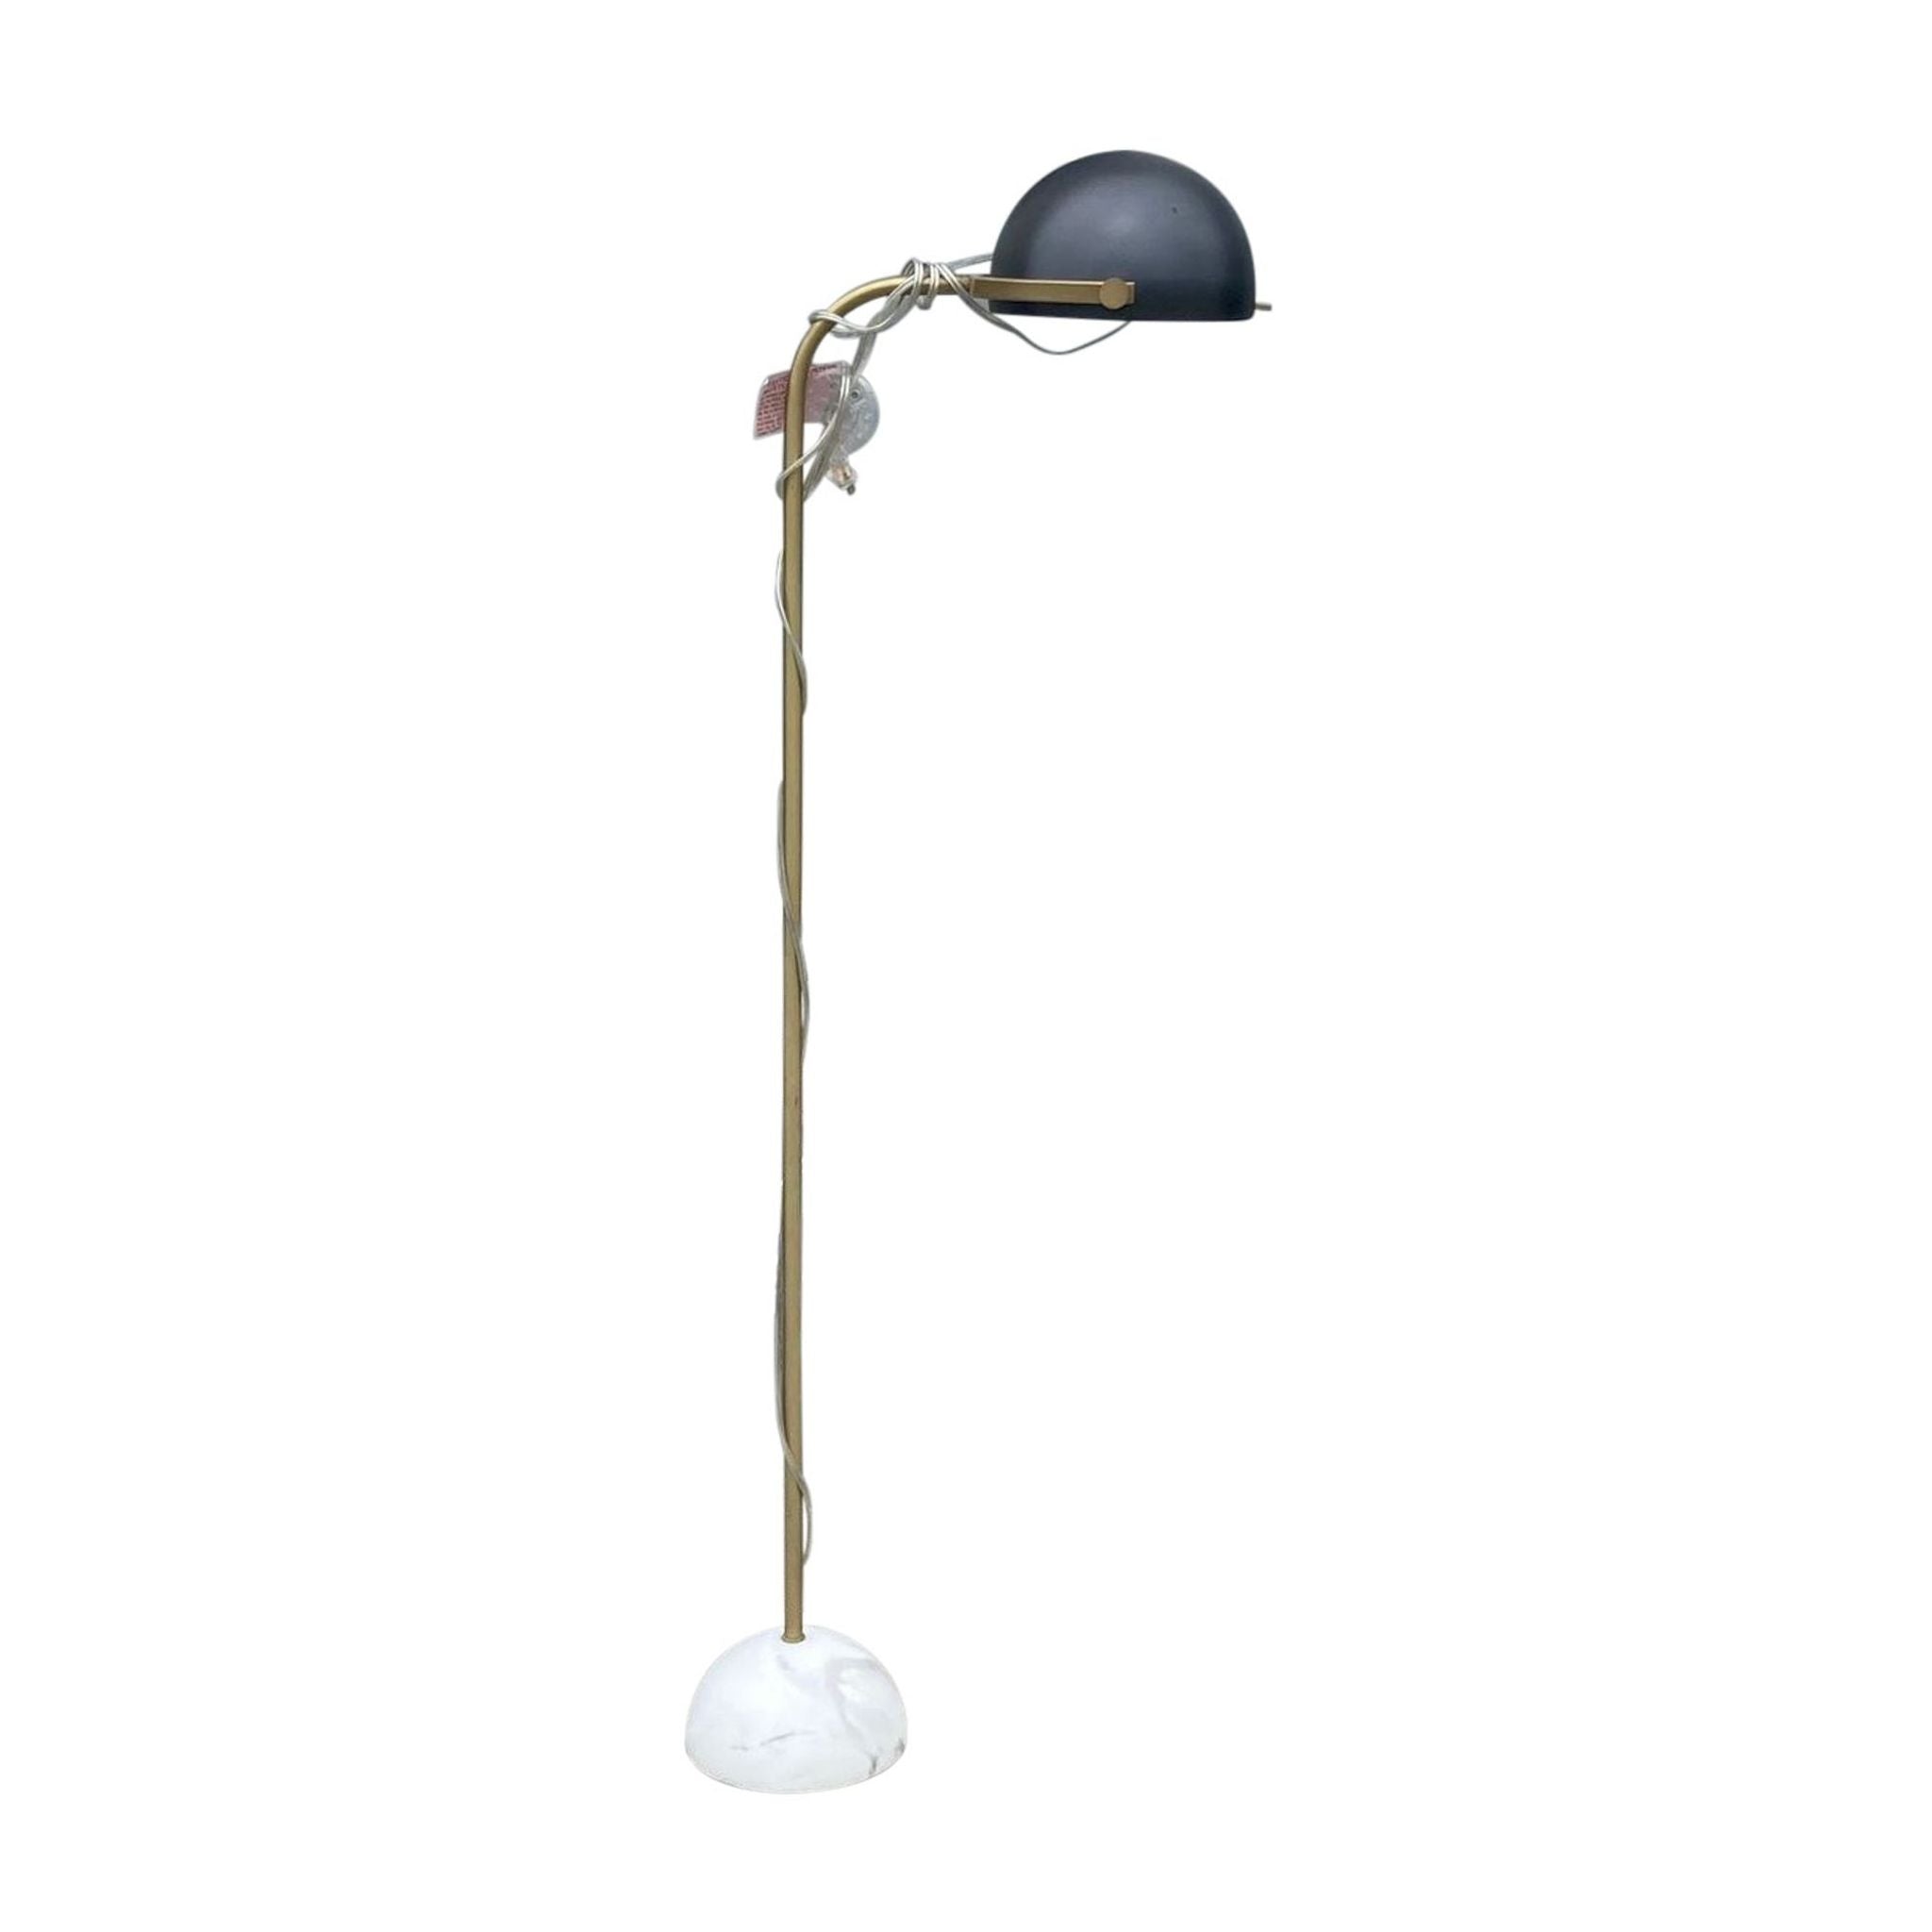 Reperch brand floor lamp with a twisted brass stand, a black shade, and a white, round stone base for stability.